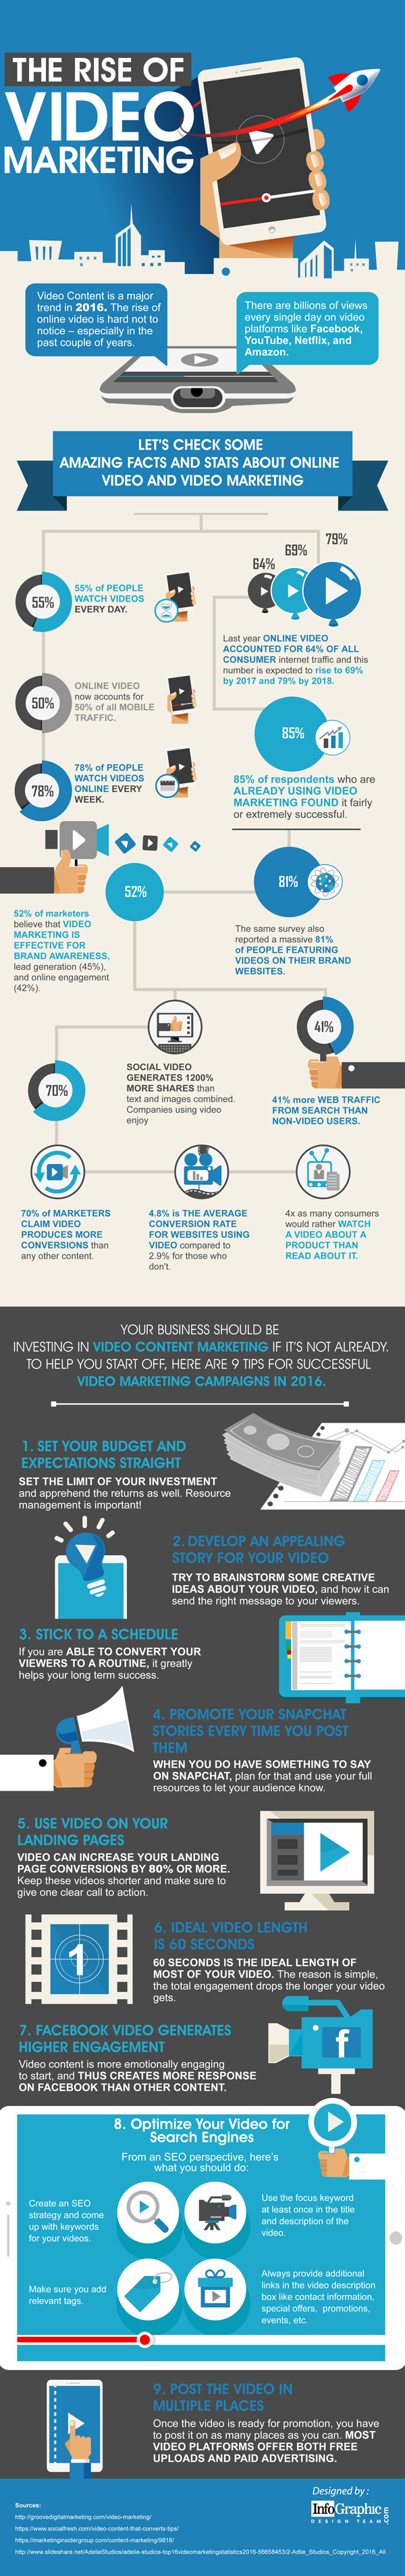 the-rise-of-video-marketing